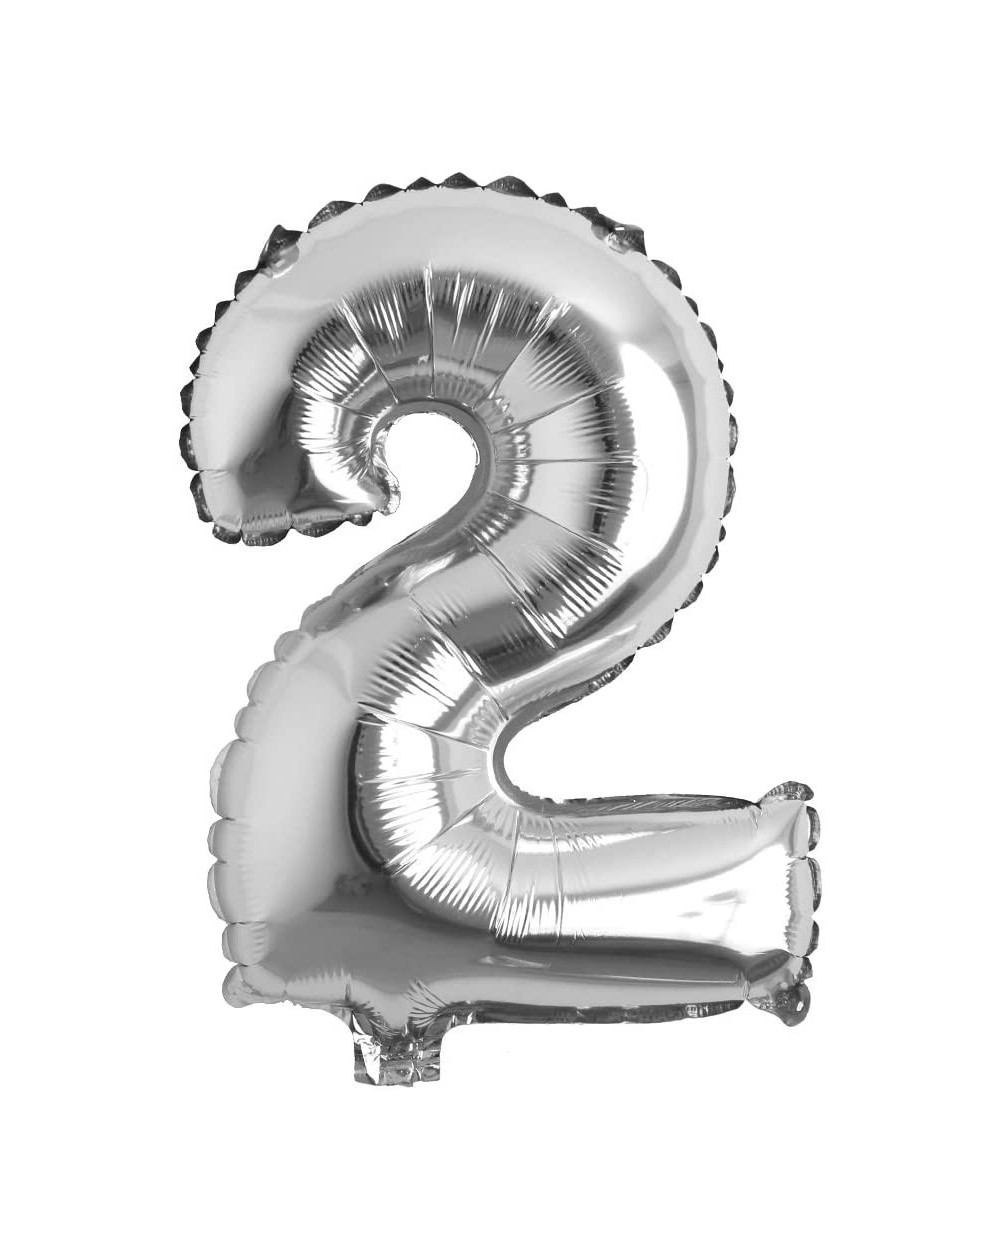 Balloons 16" inch Single Silver Alphabet Letter Number Balloons Aluminum Hanging Foil Film Balloon Wedding Birthday Party Dec...